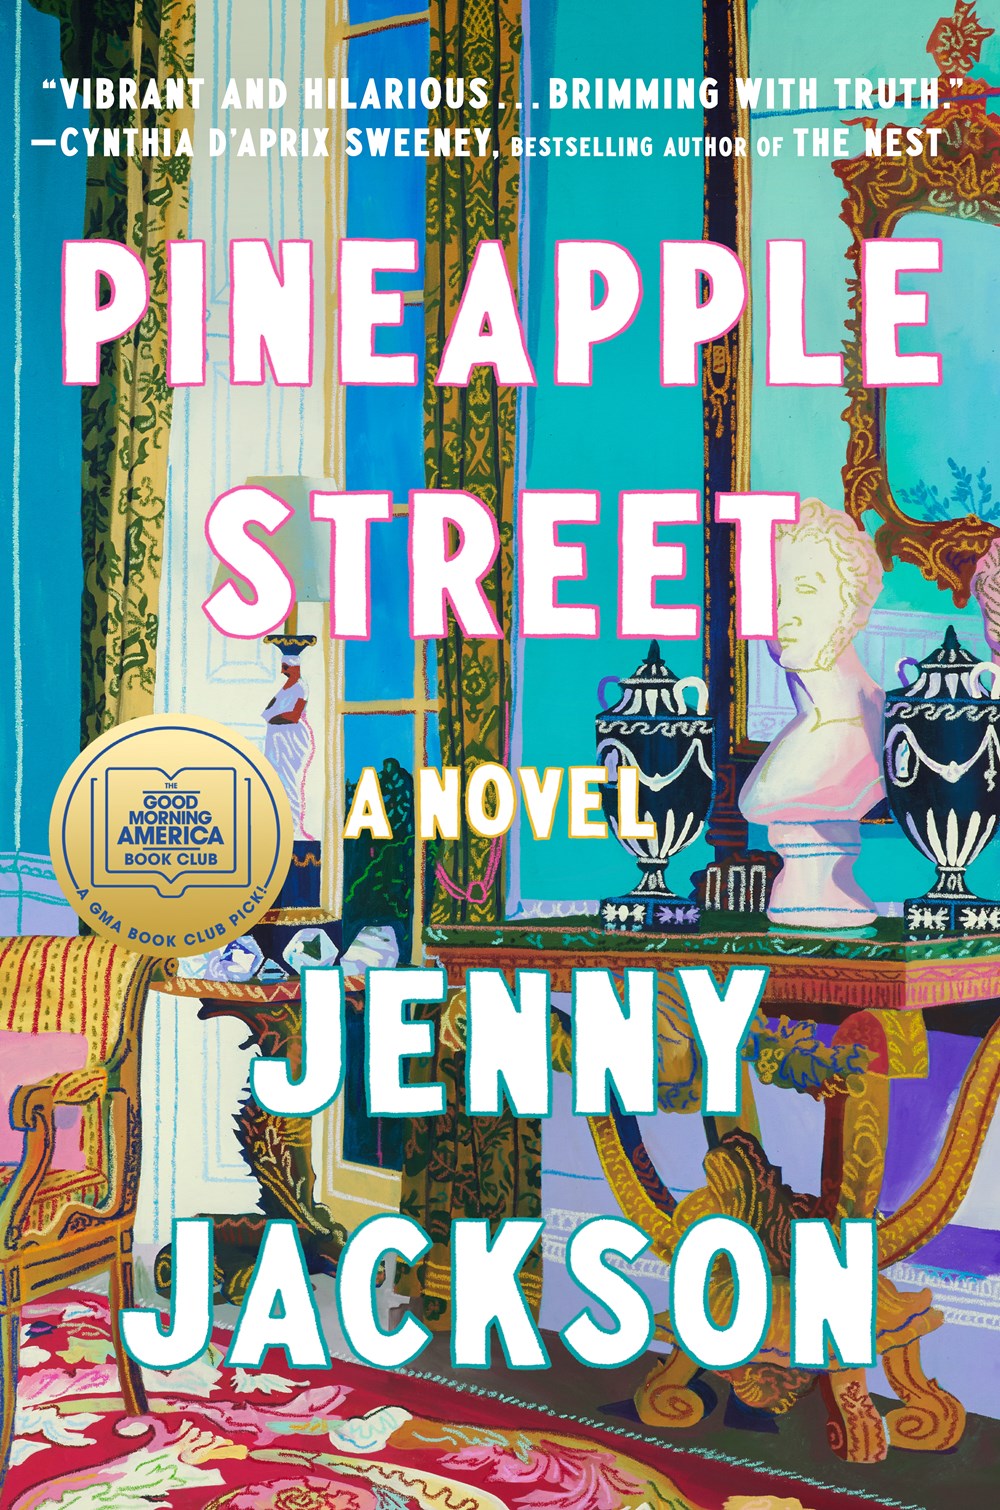 Pineapple Street cover image